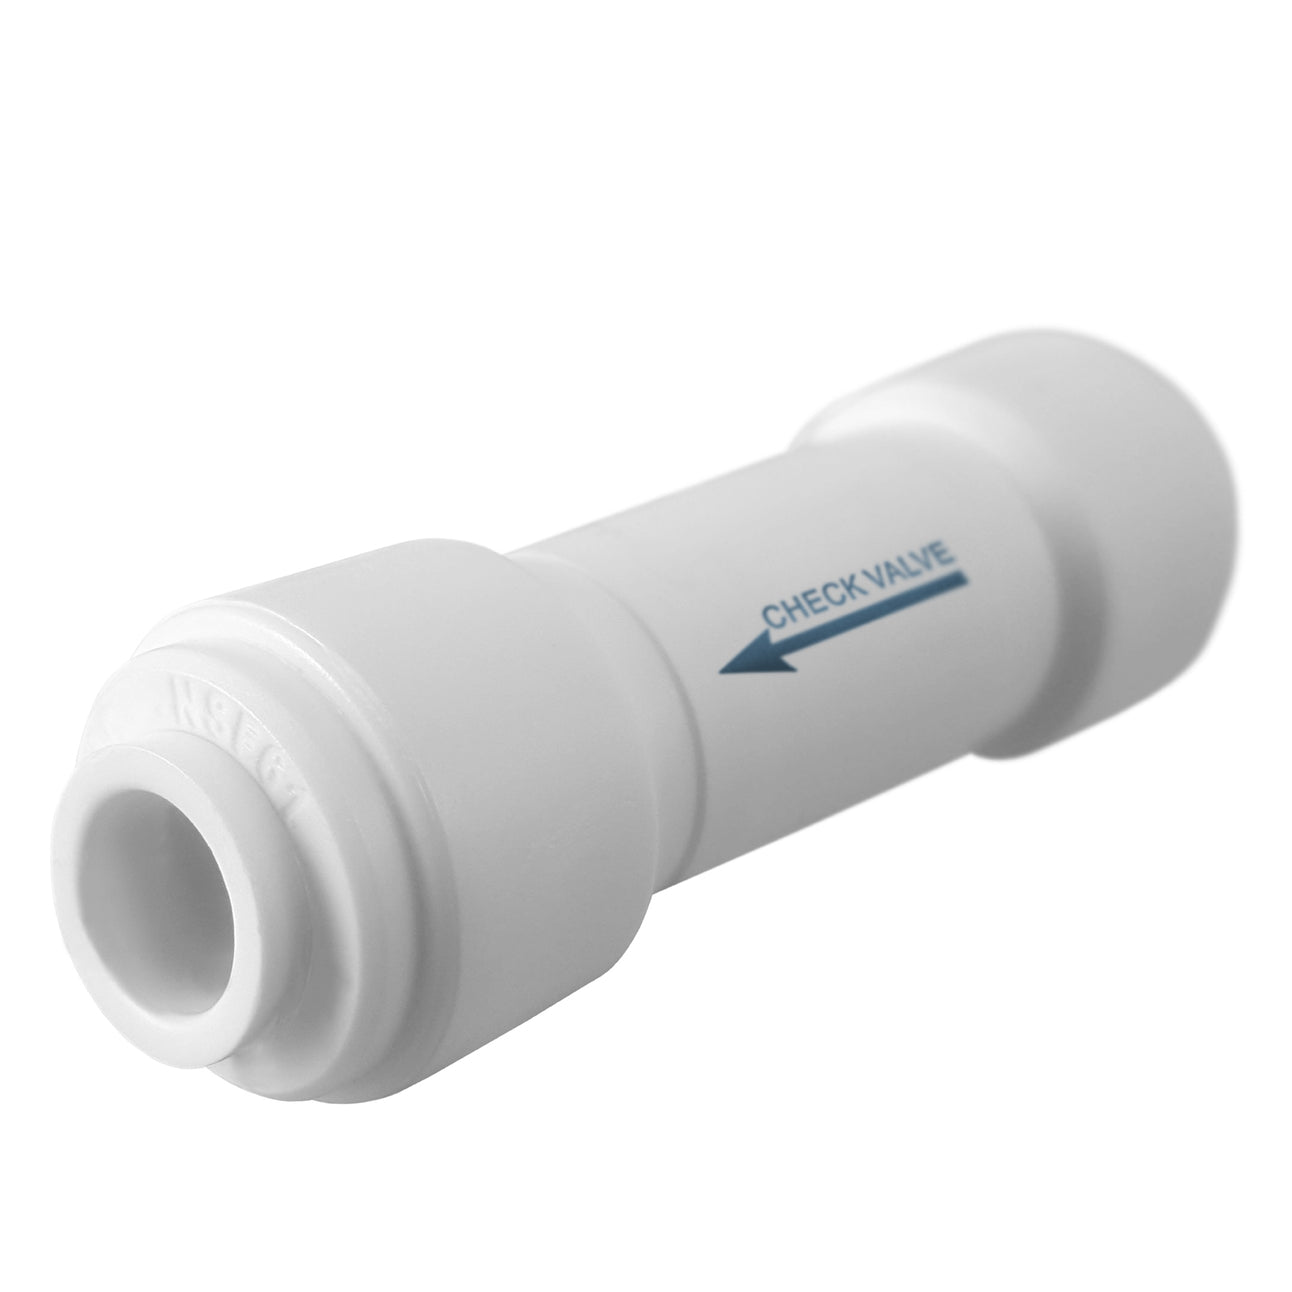 Straight Check Valve 1/4" Fitting Connection Parts for Water Filters/Reverse Osmosis RO Systems - dev-express-water